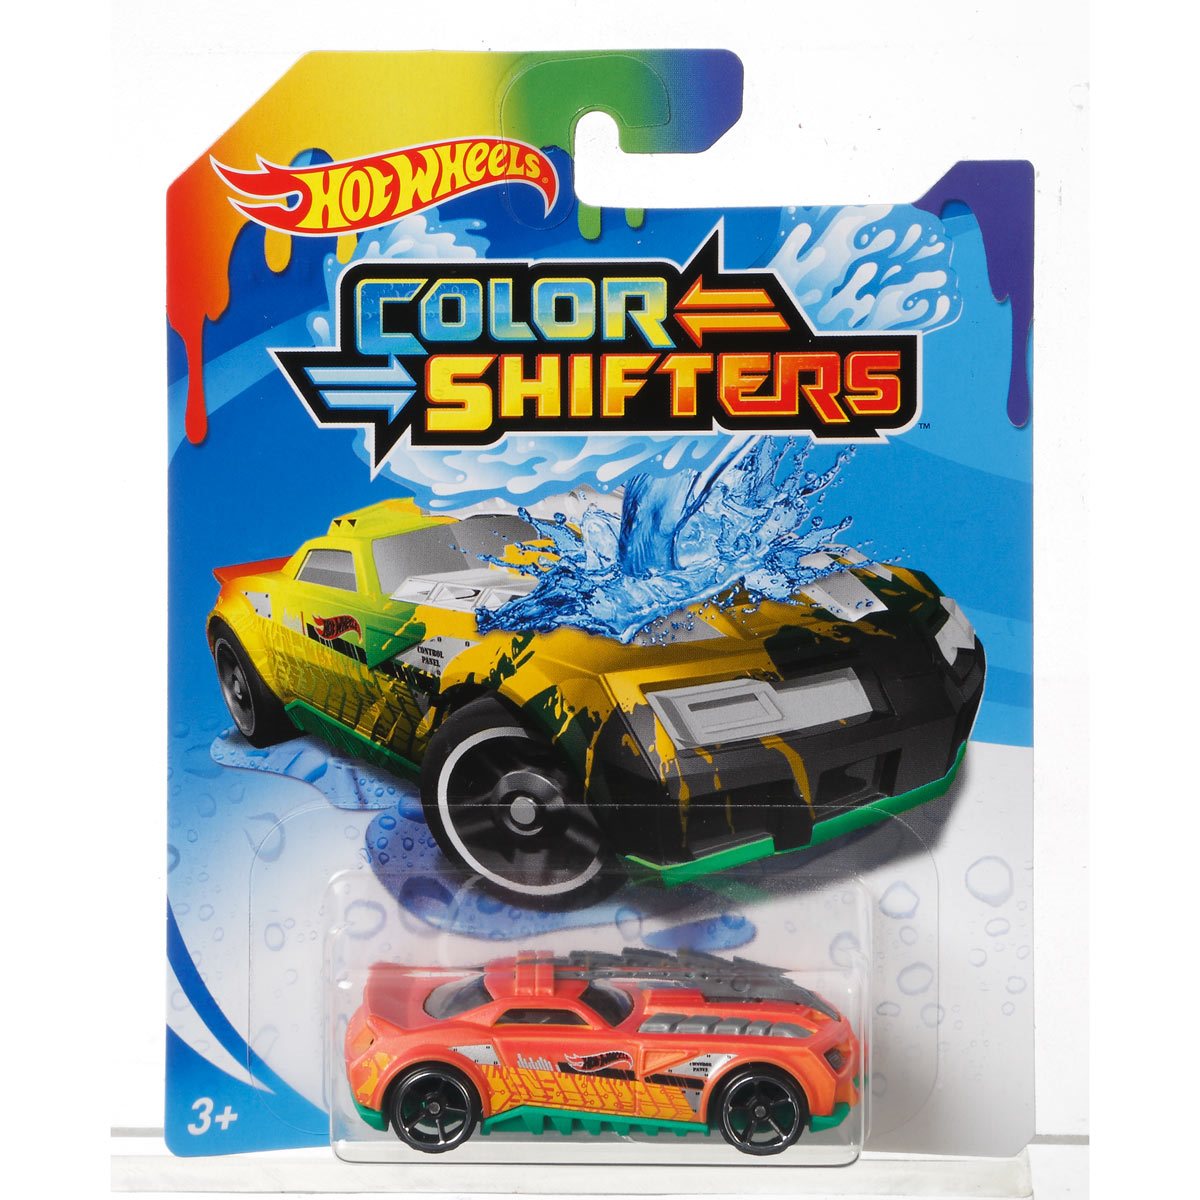 Hot Wheels COLOR SHIFTERS Color Changing 1:64